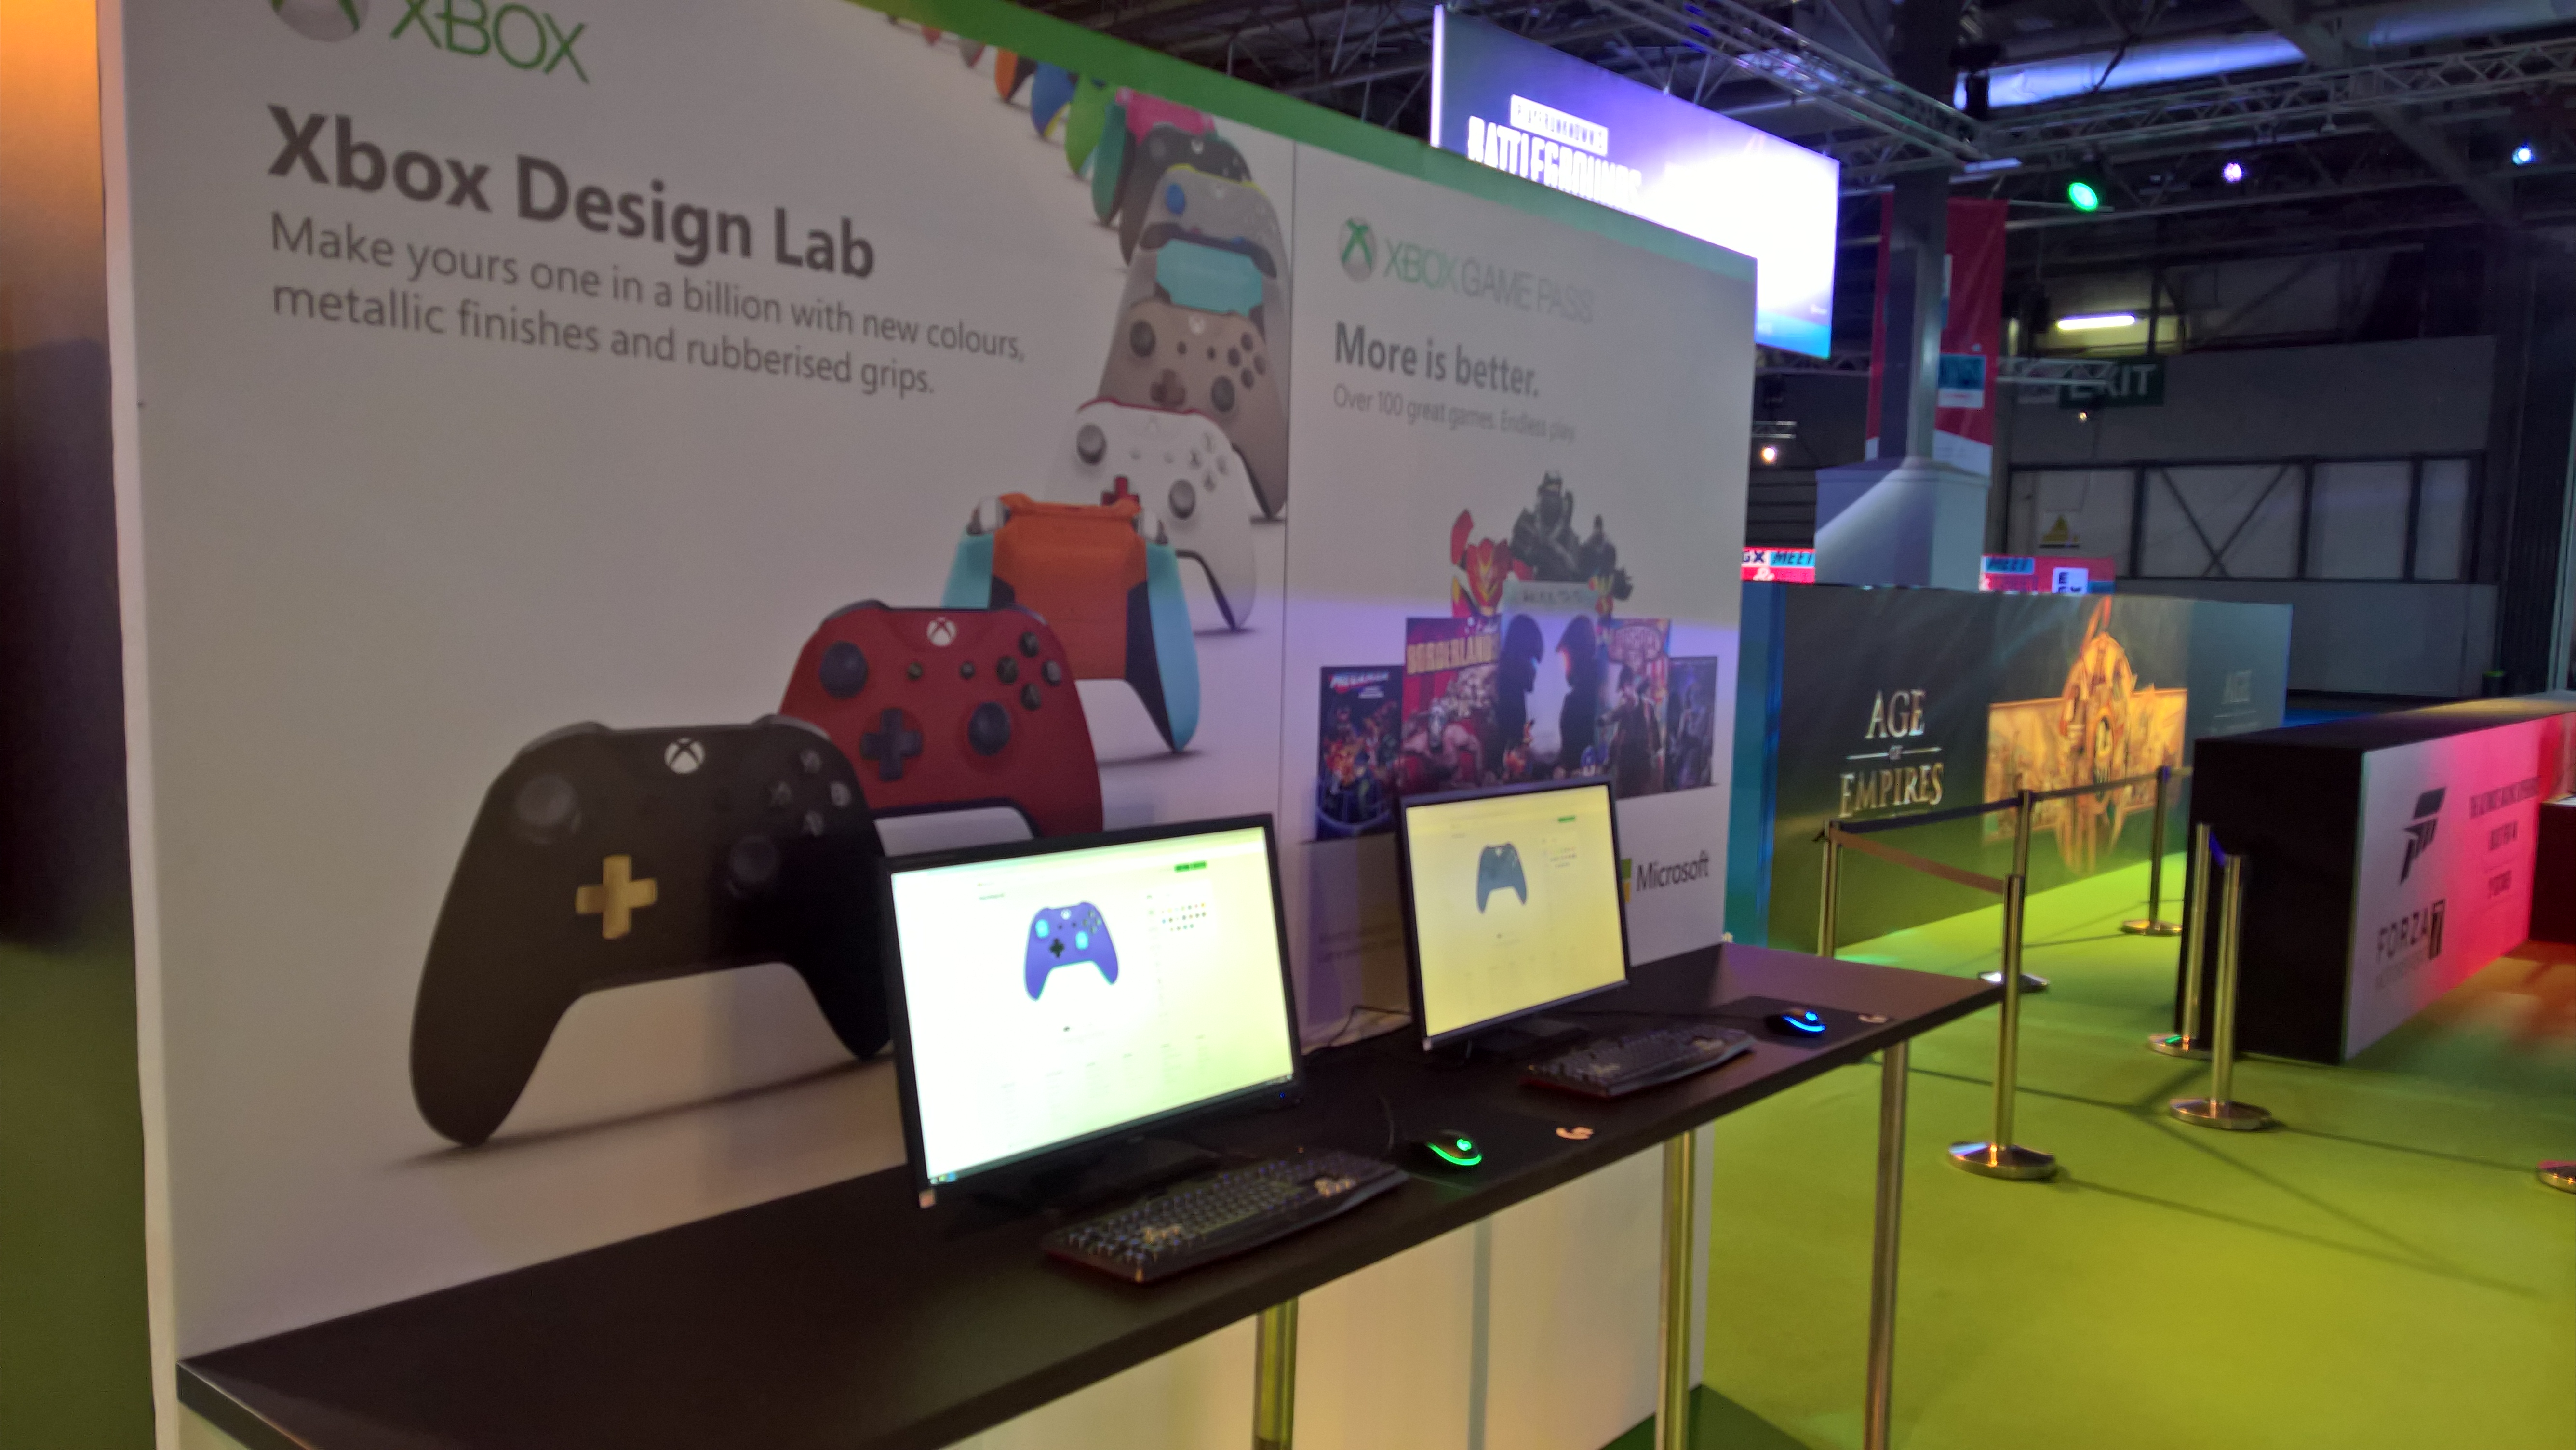 Design Lab lets players customise their Xbox controller